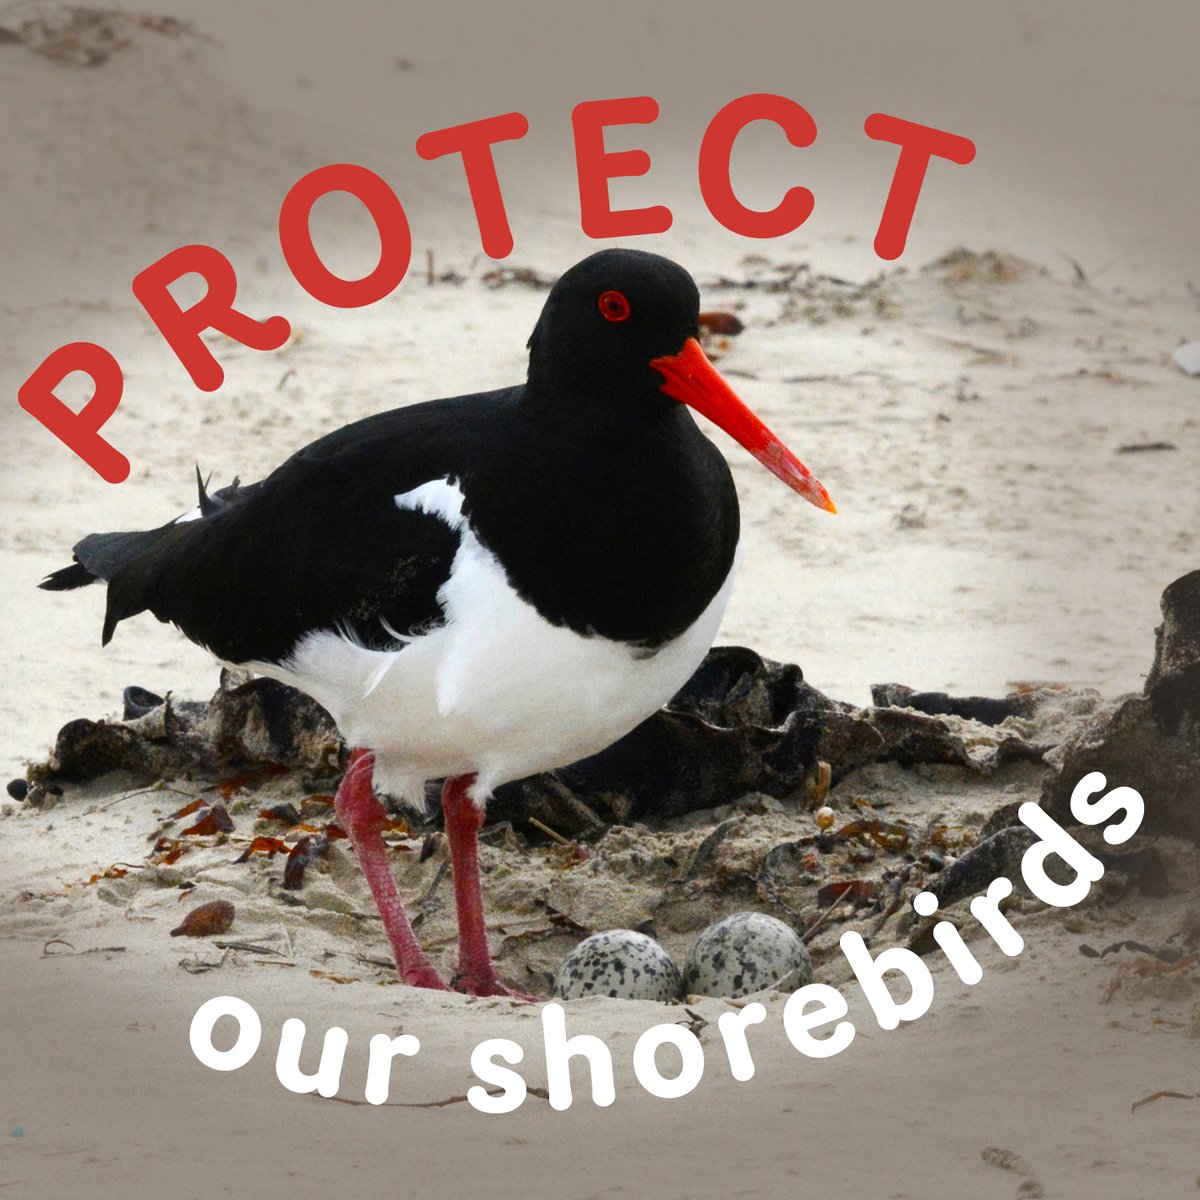 We thank the many volunteers and community groups who dedicate time to help protect our shorebirds. It’s important to keep your distance from nesting birds on our beaches. Shorebird nesting season continues until March 2023. Find out more: tinyurl.com/4jpja2fa